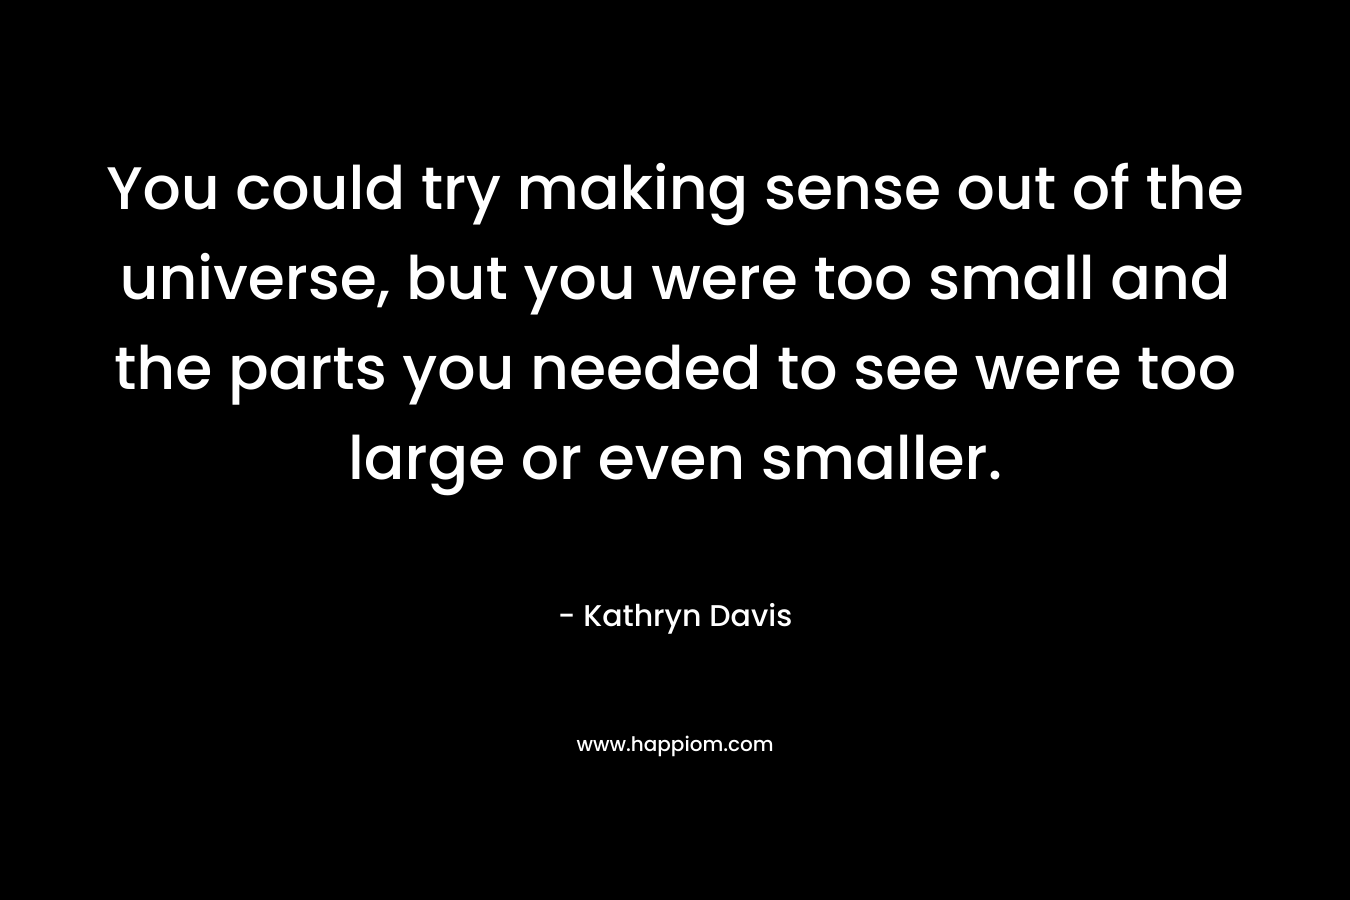 You could try making sense out of the universe, but you were too small and the parts you needed to see were too large or even smaller. – Kathryn Davis